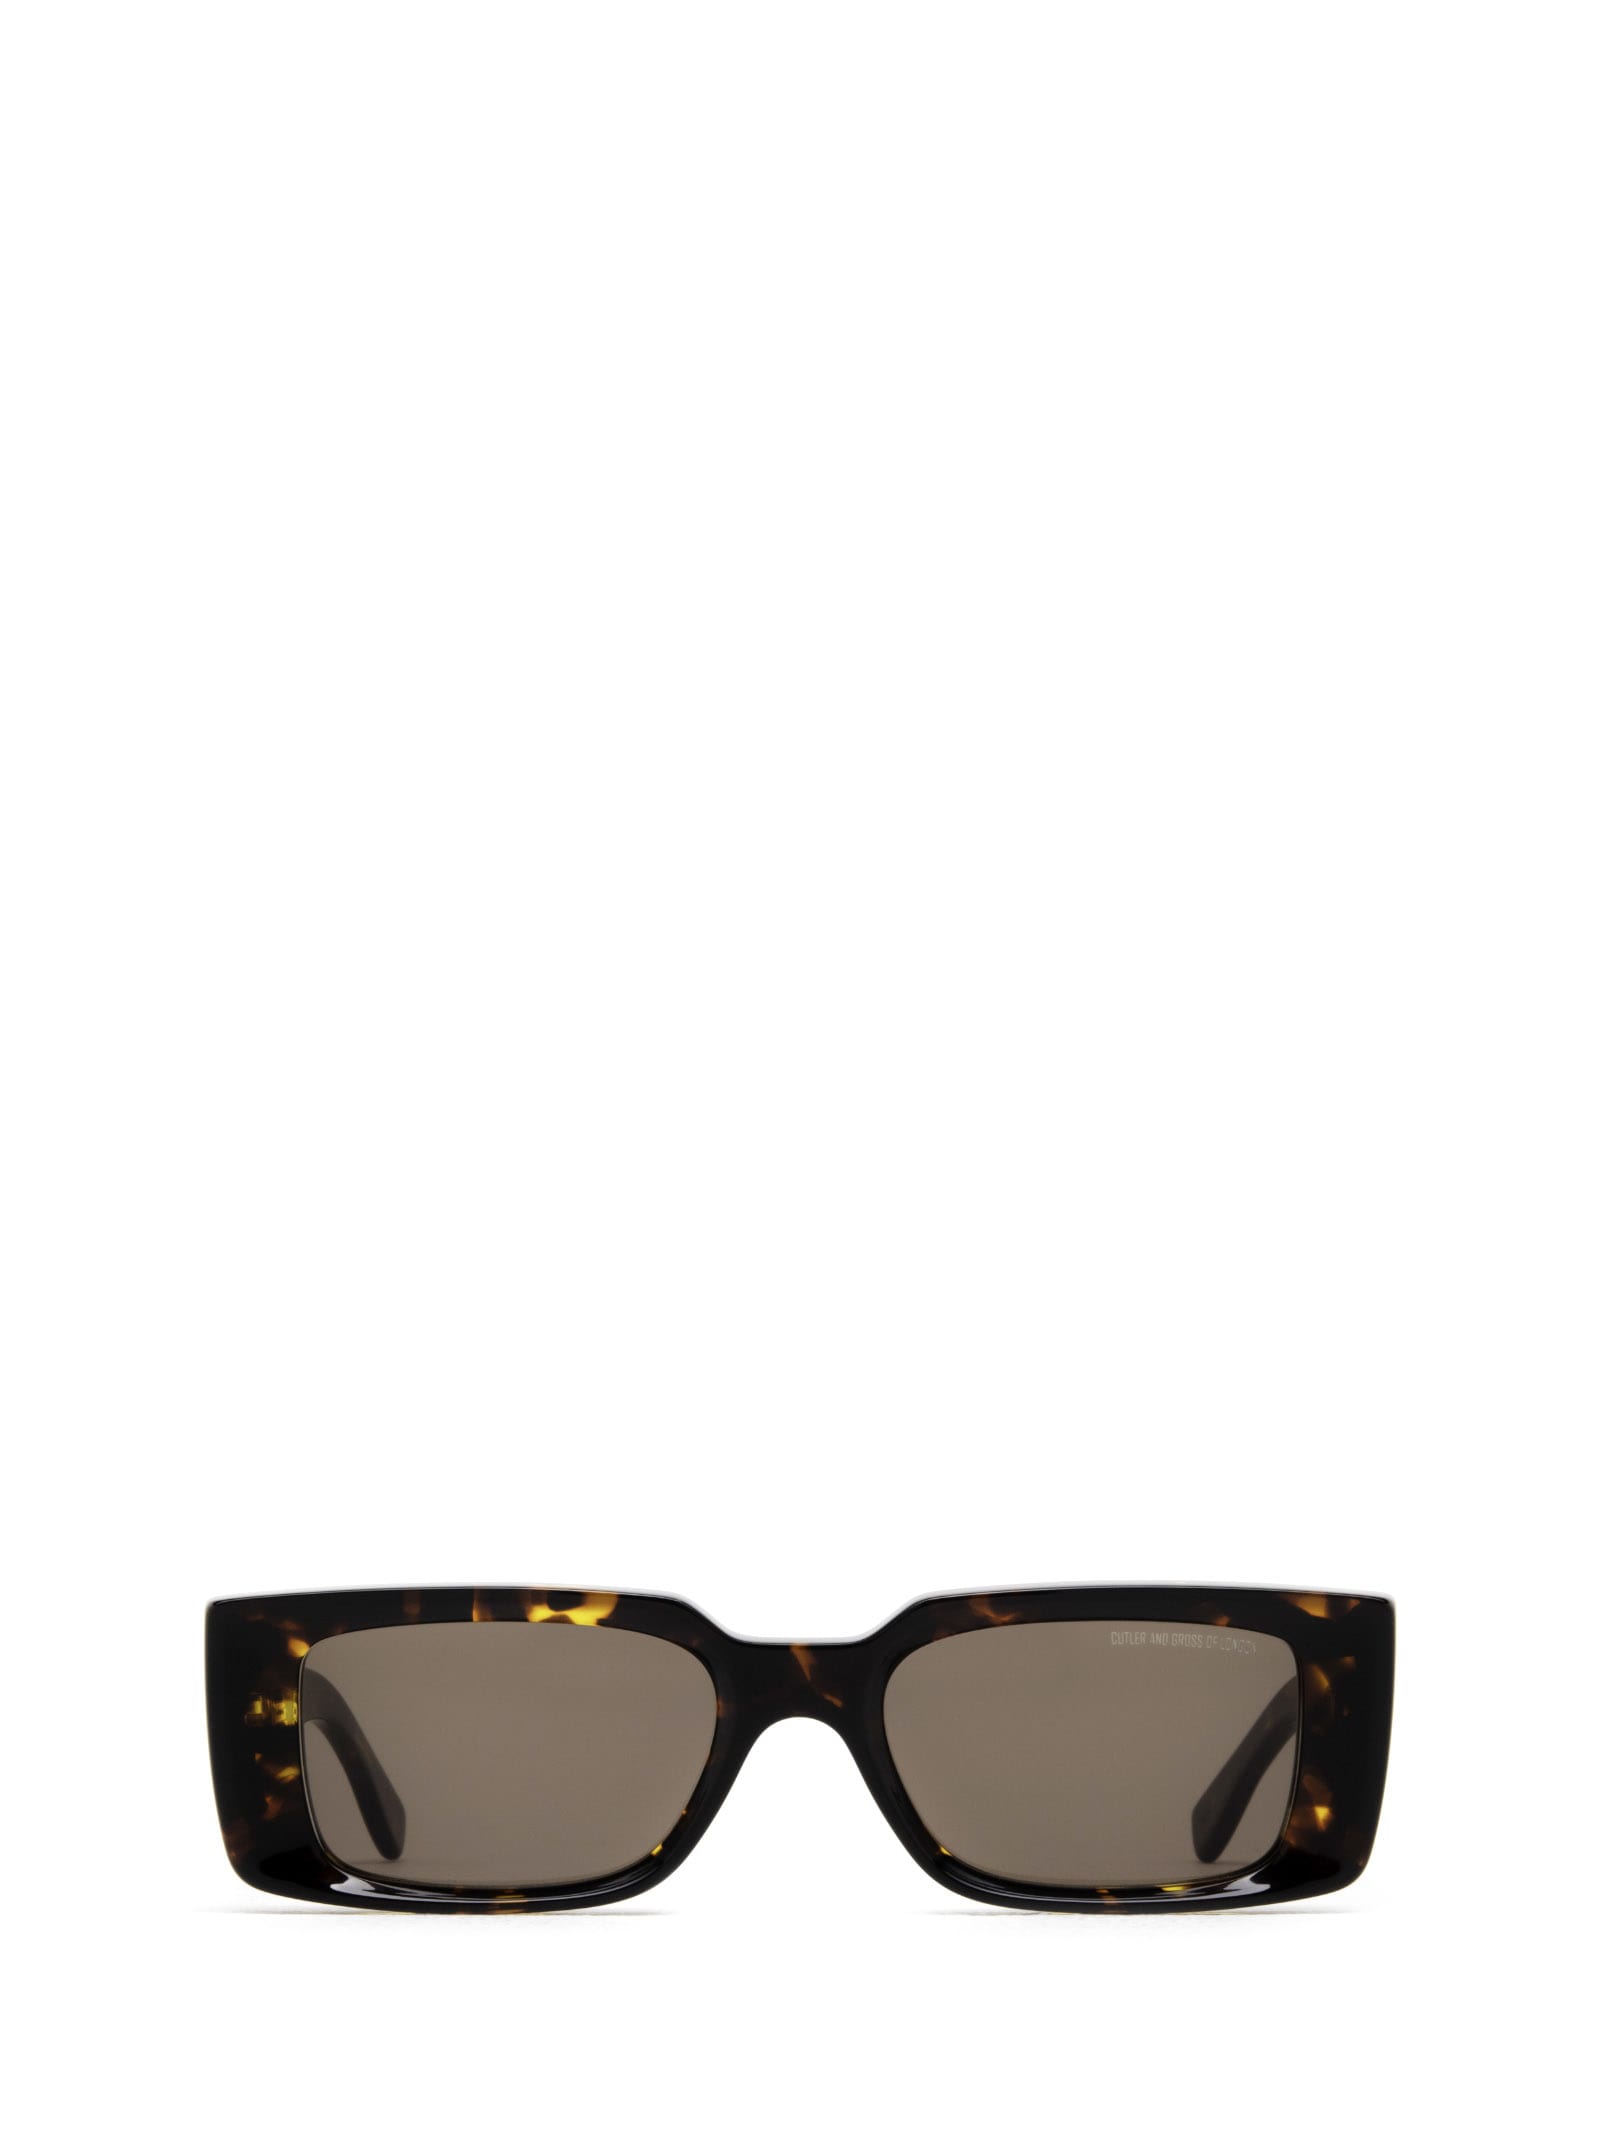 Cutler and Gross 1368 Sun Sticky Toffee Sunglasses